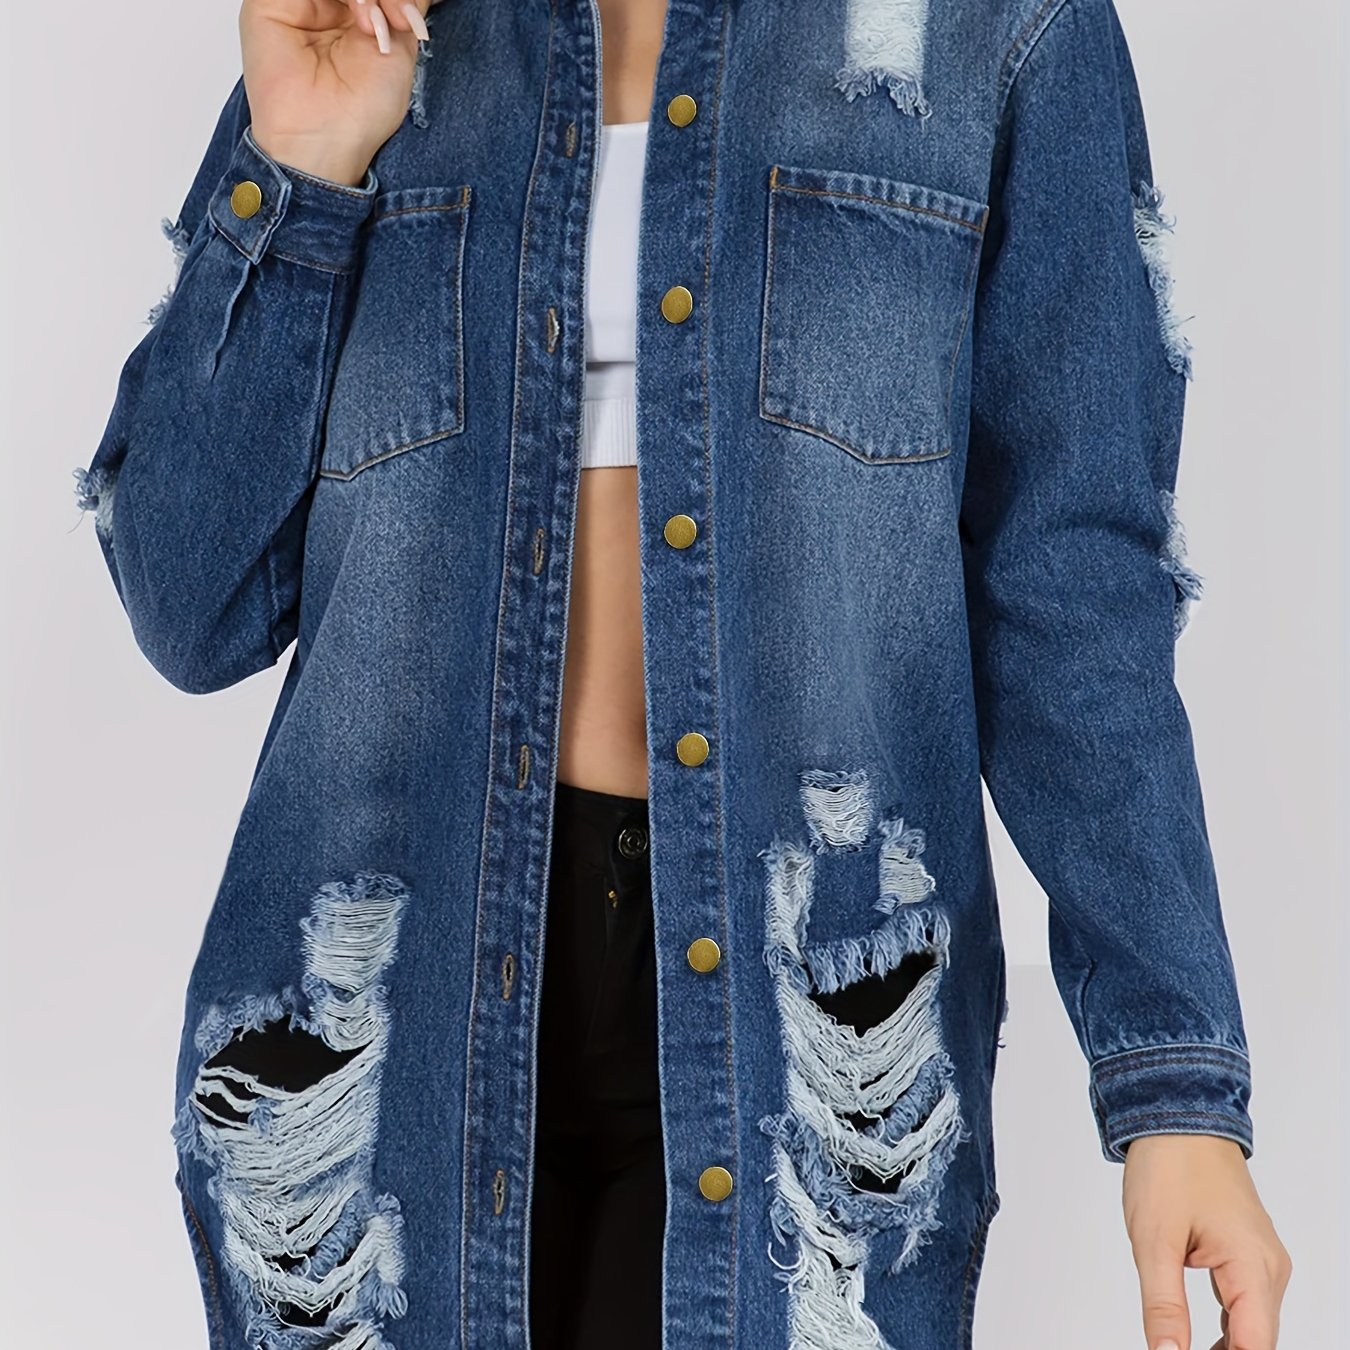 Lovevop-Distressed Denim Jacket, Long Button Up Ripped Jean Jacket Top, Women's Clothing & Outerwear